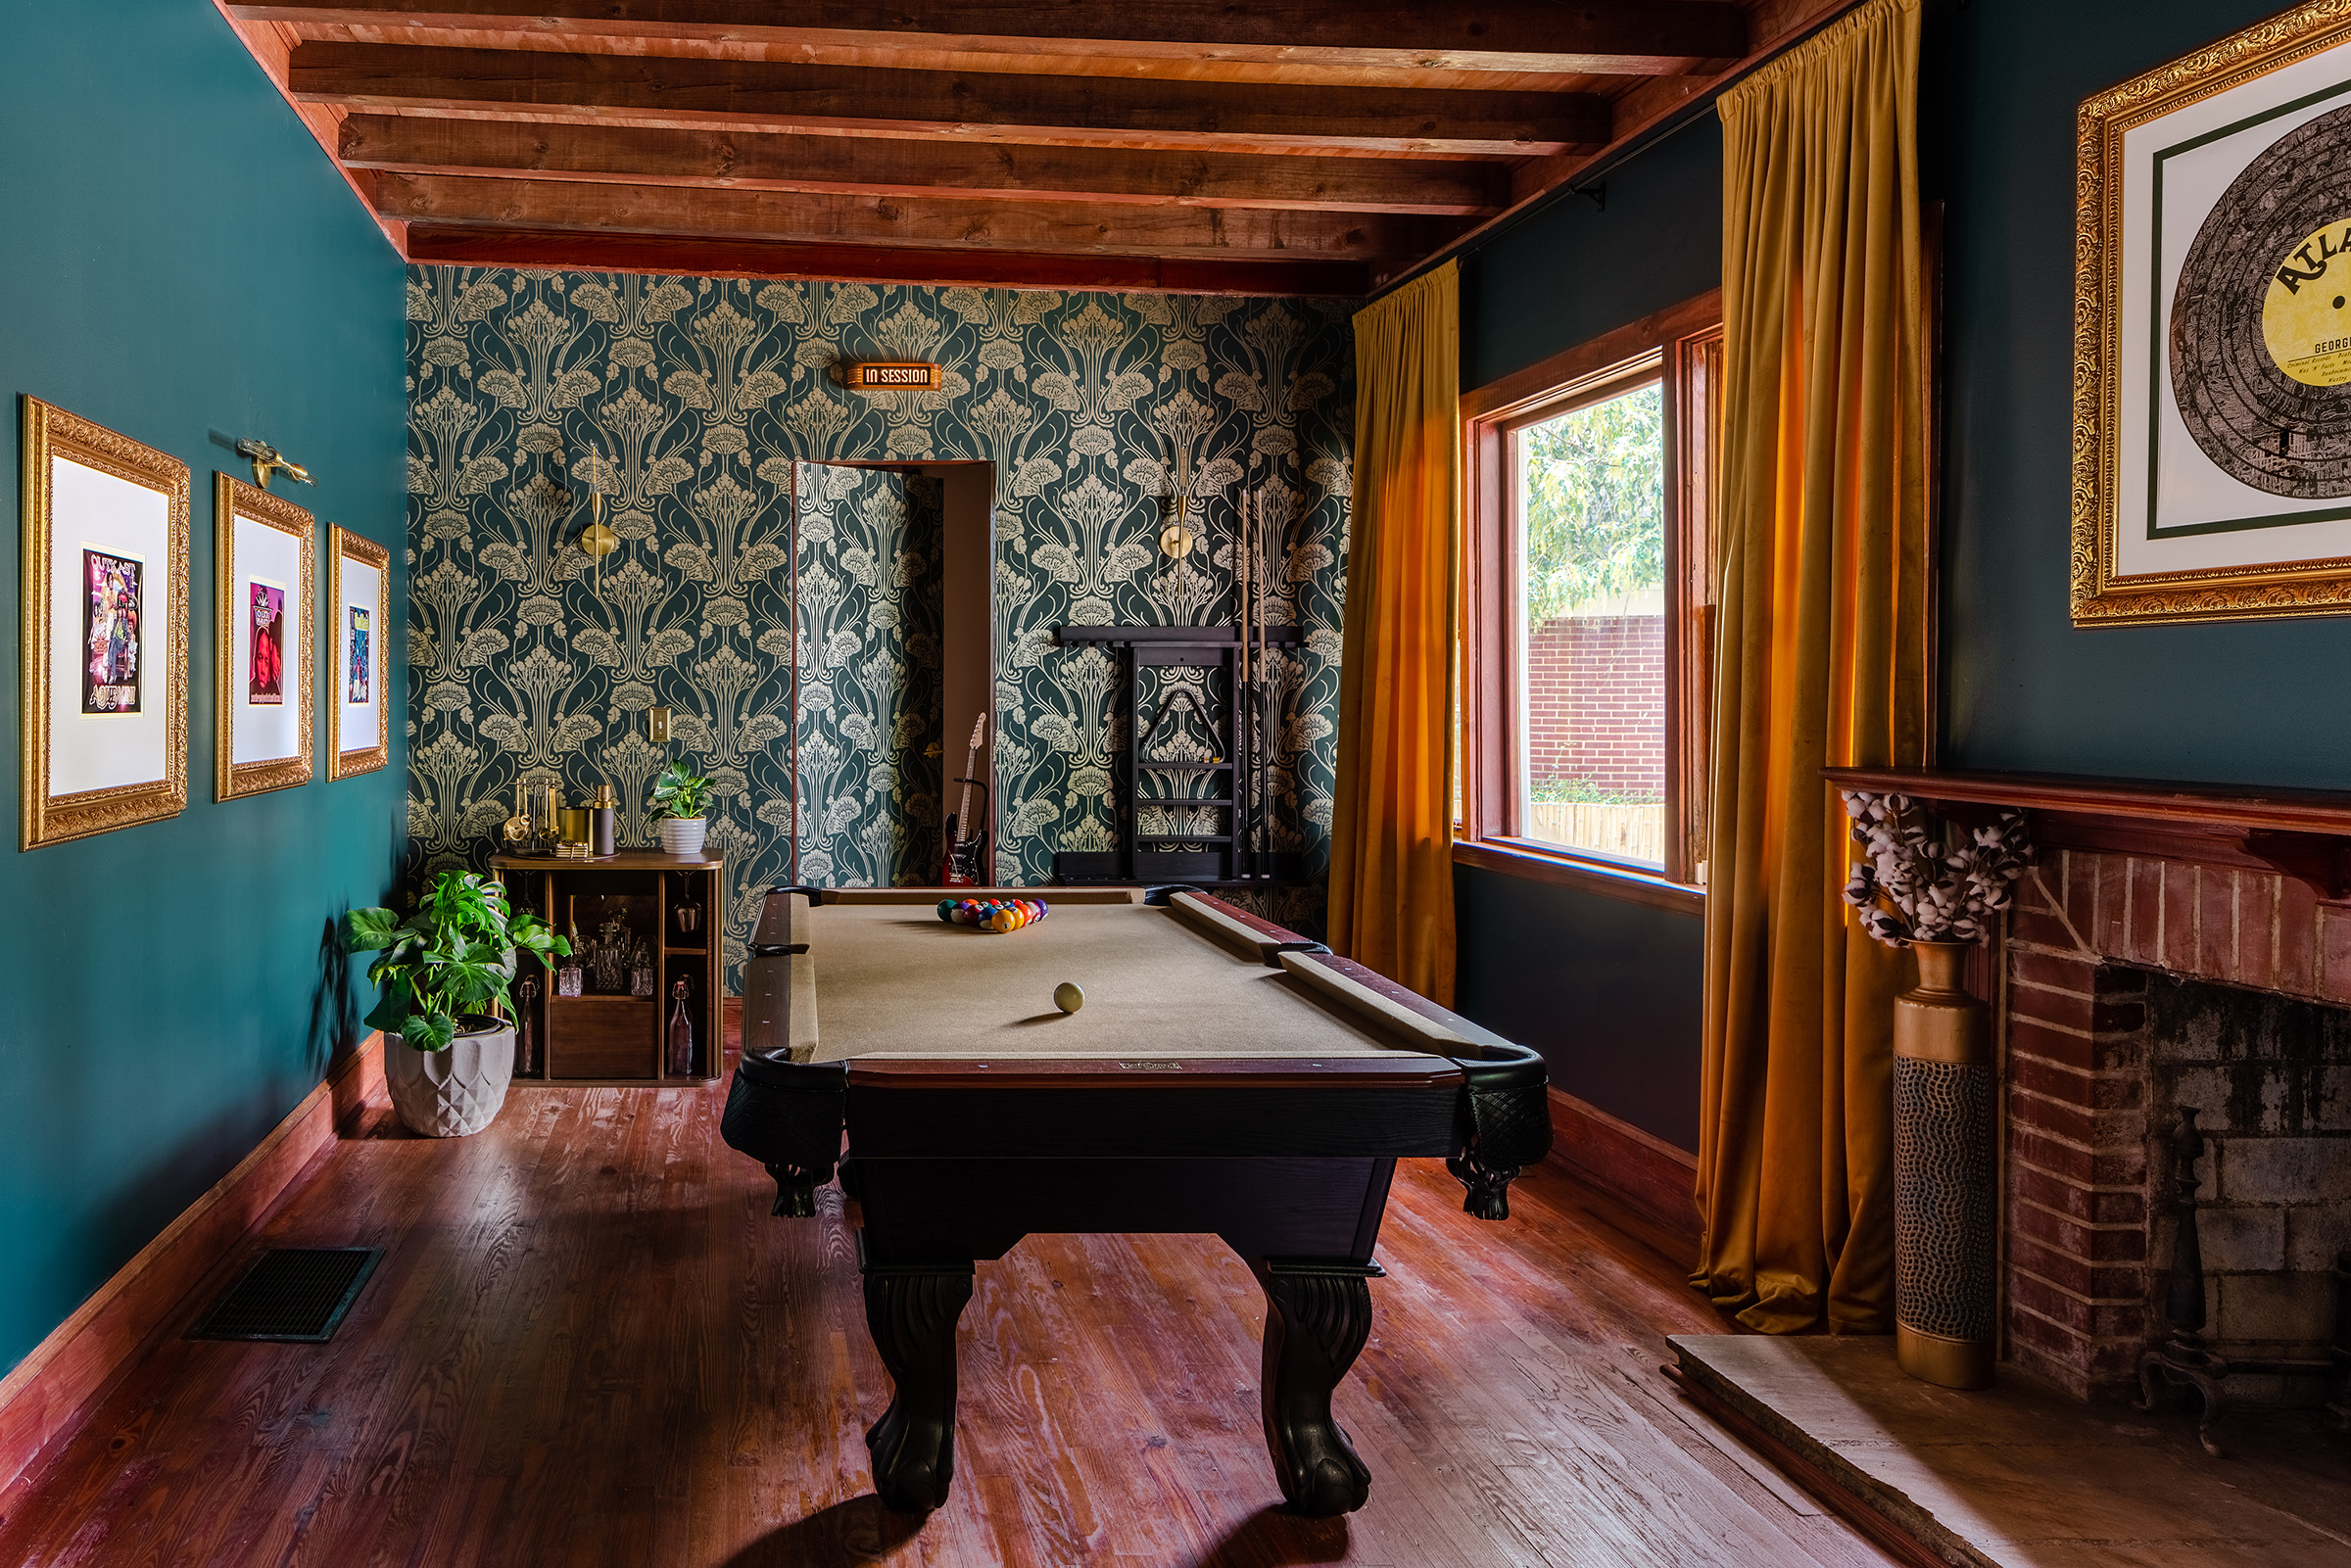 Billiards room of The Dungeon House with exposed wooden beams, a pool table and jewel blue toned walls and wallpaper